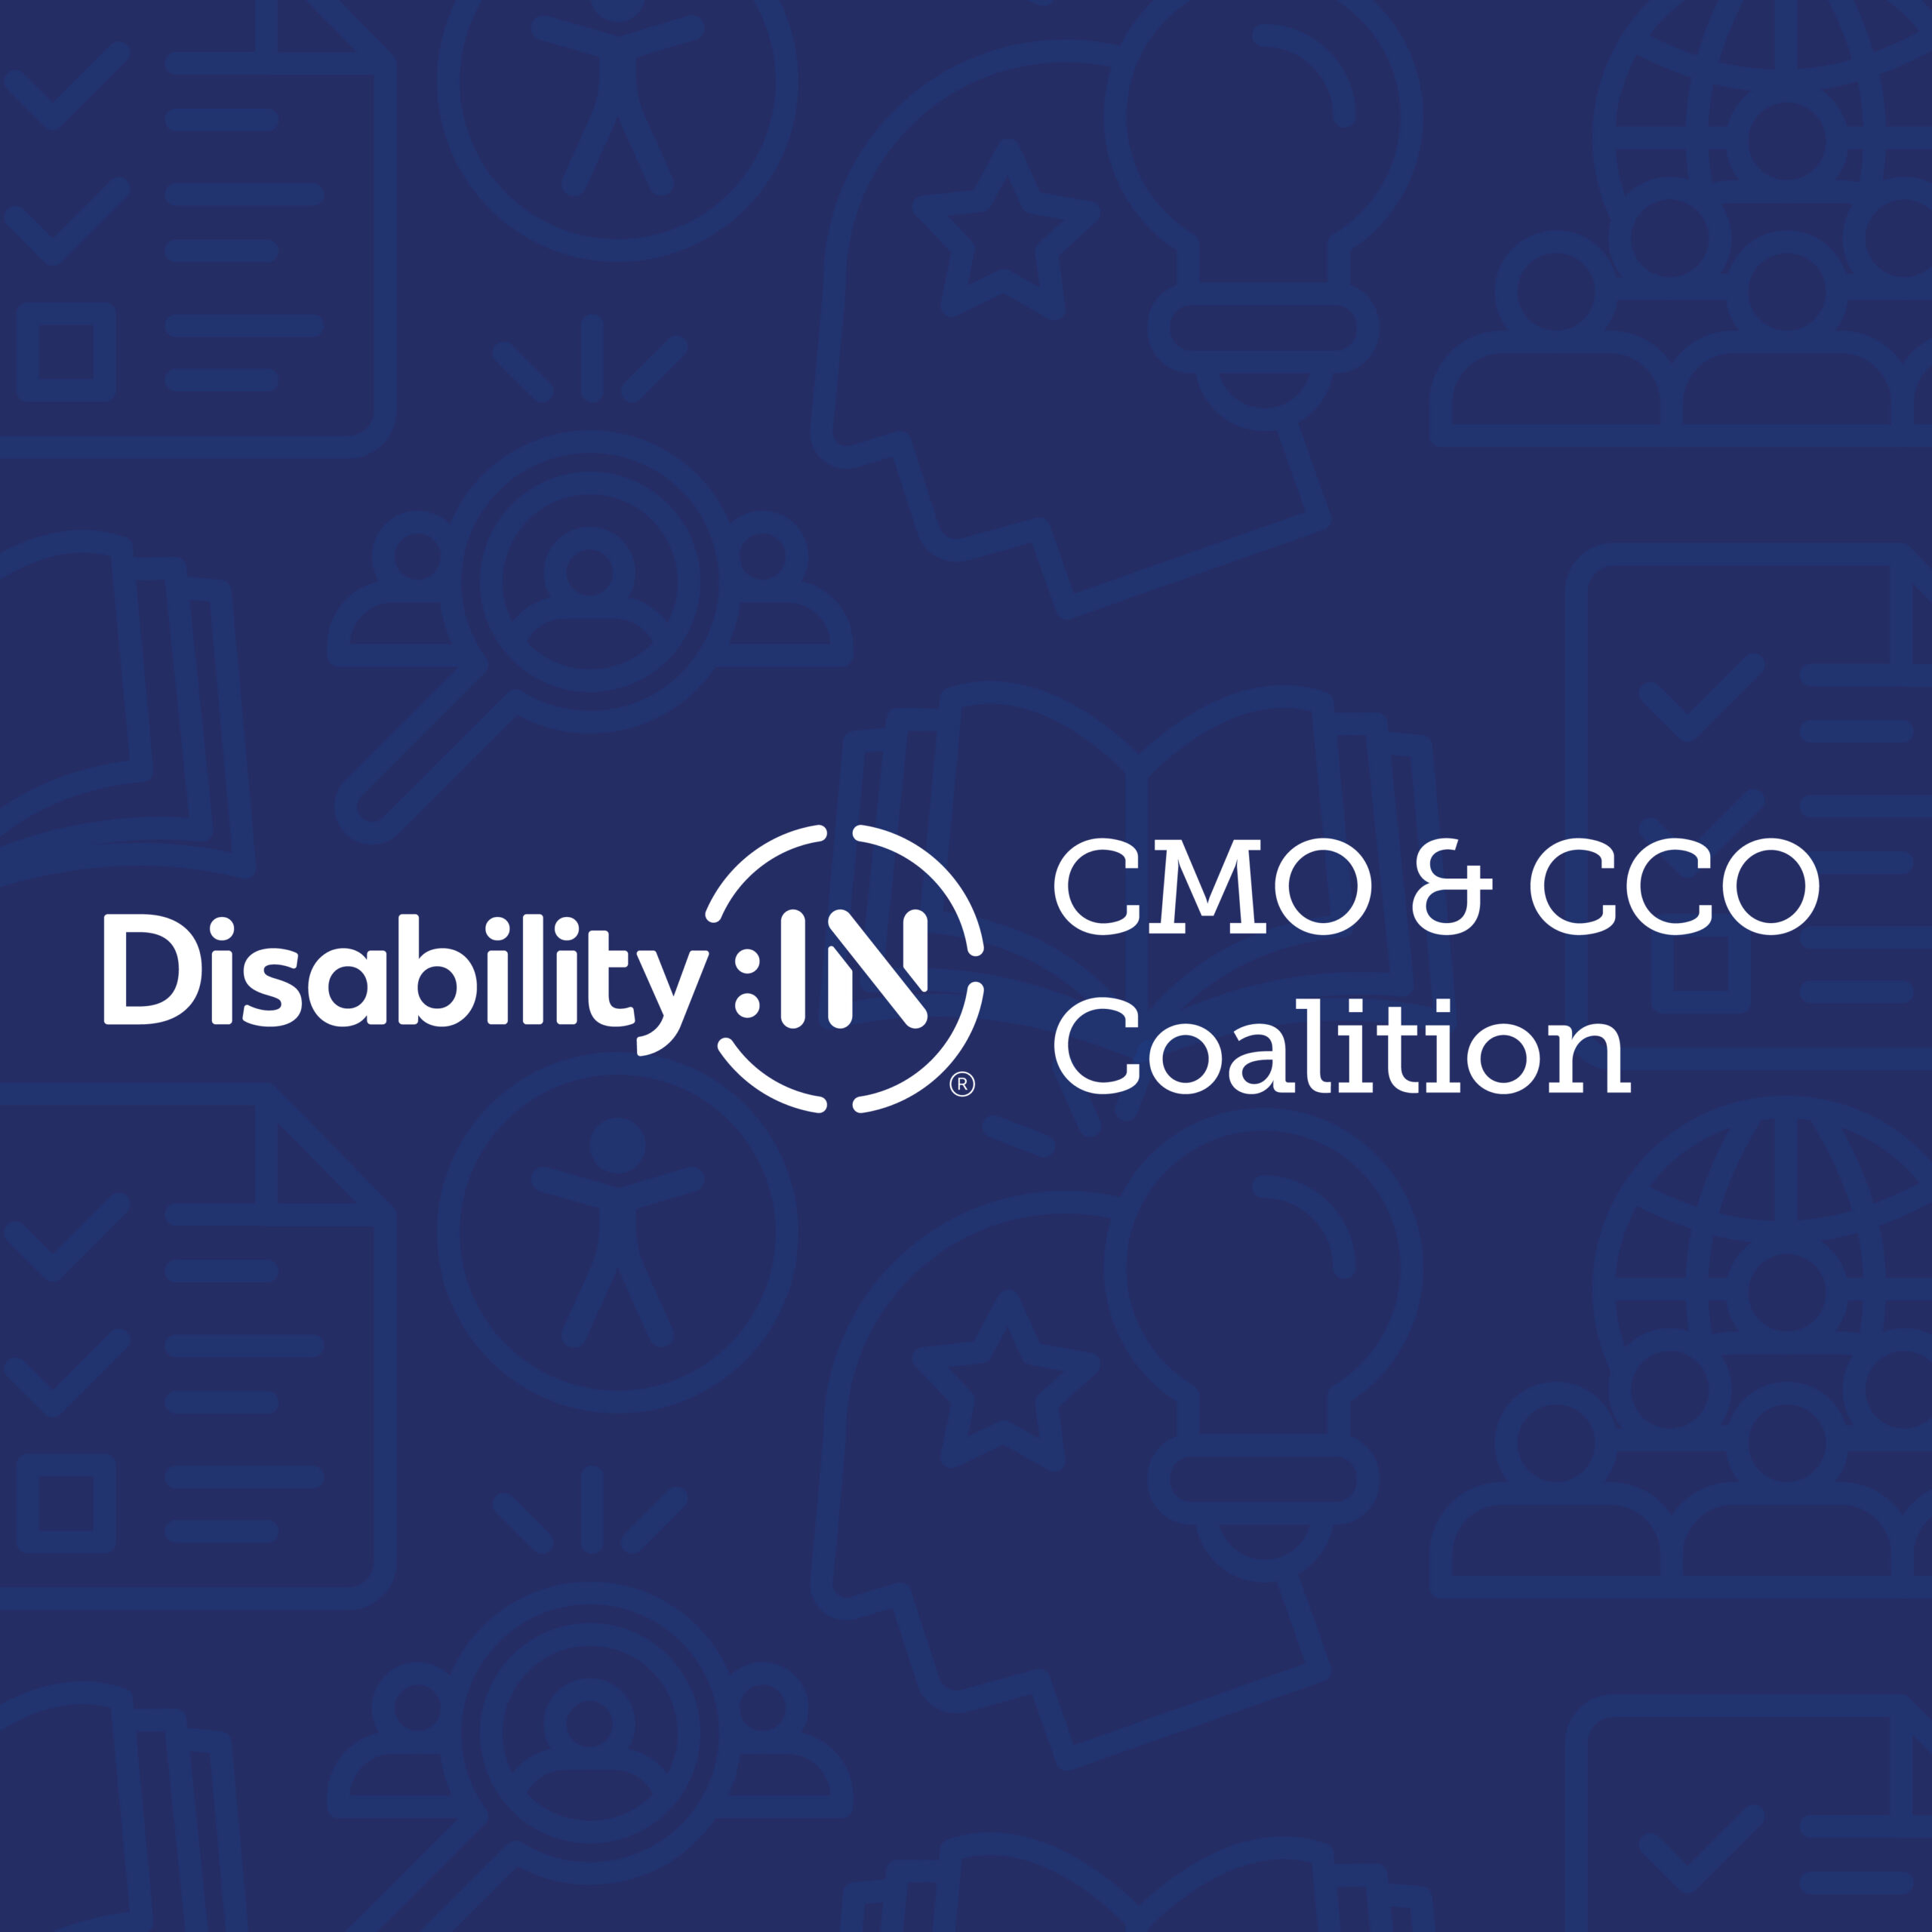 Disability:IN CMO & CCO Coalition in white against navy blue icon background.